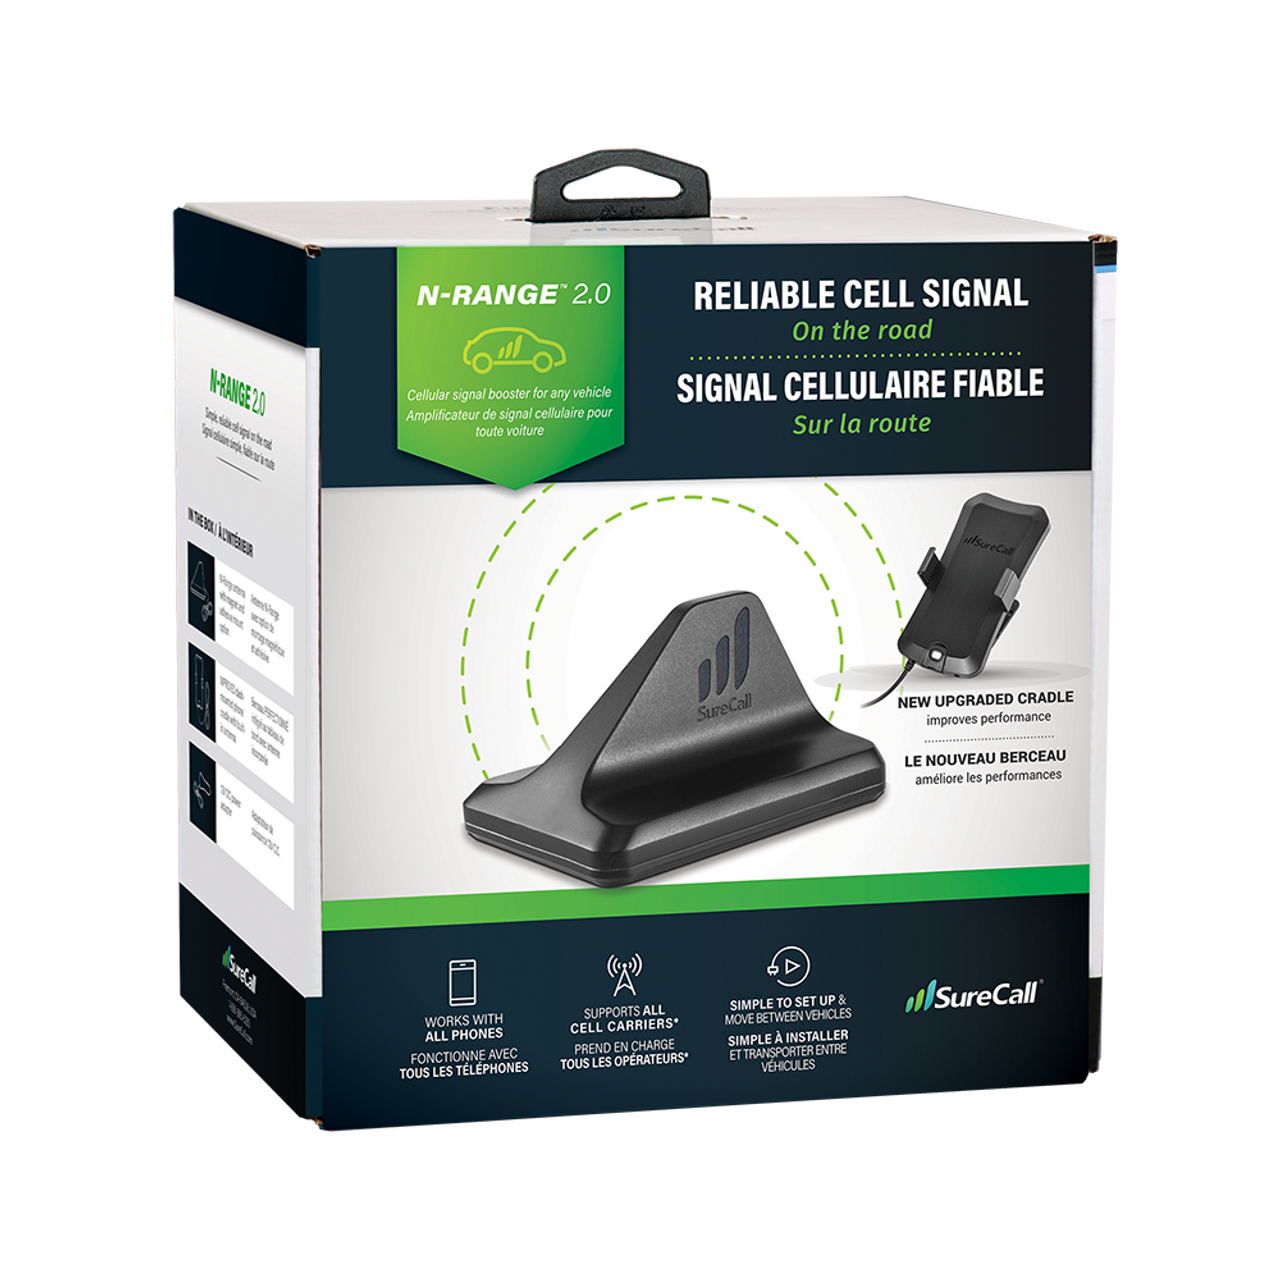 N-Range 2.0 Cell Phone Signal Booster